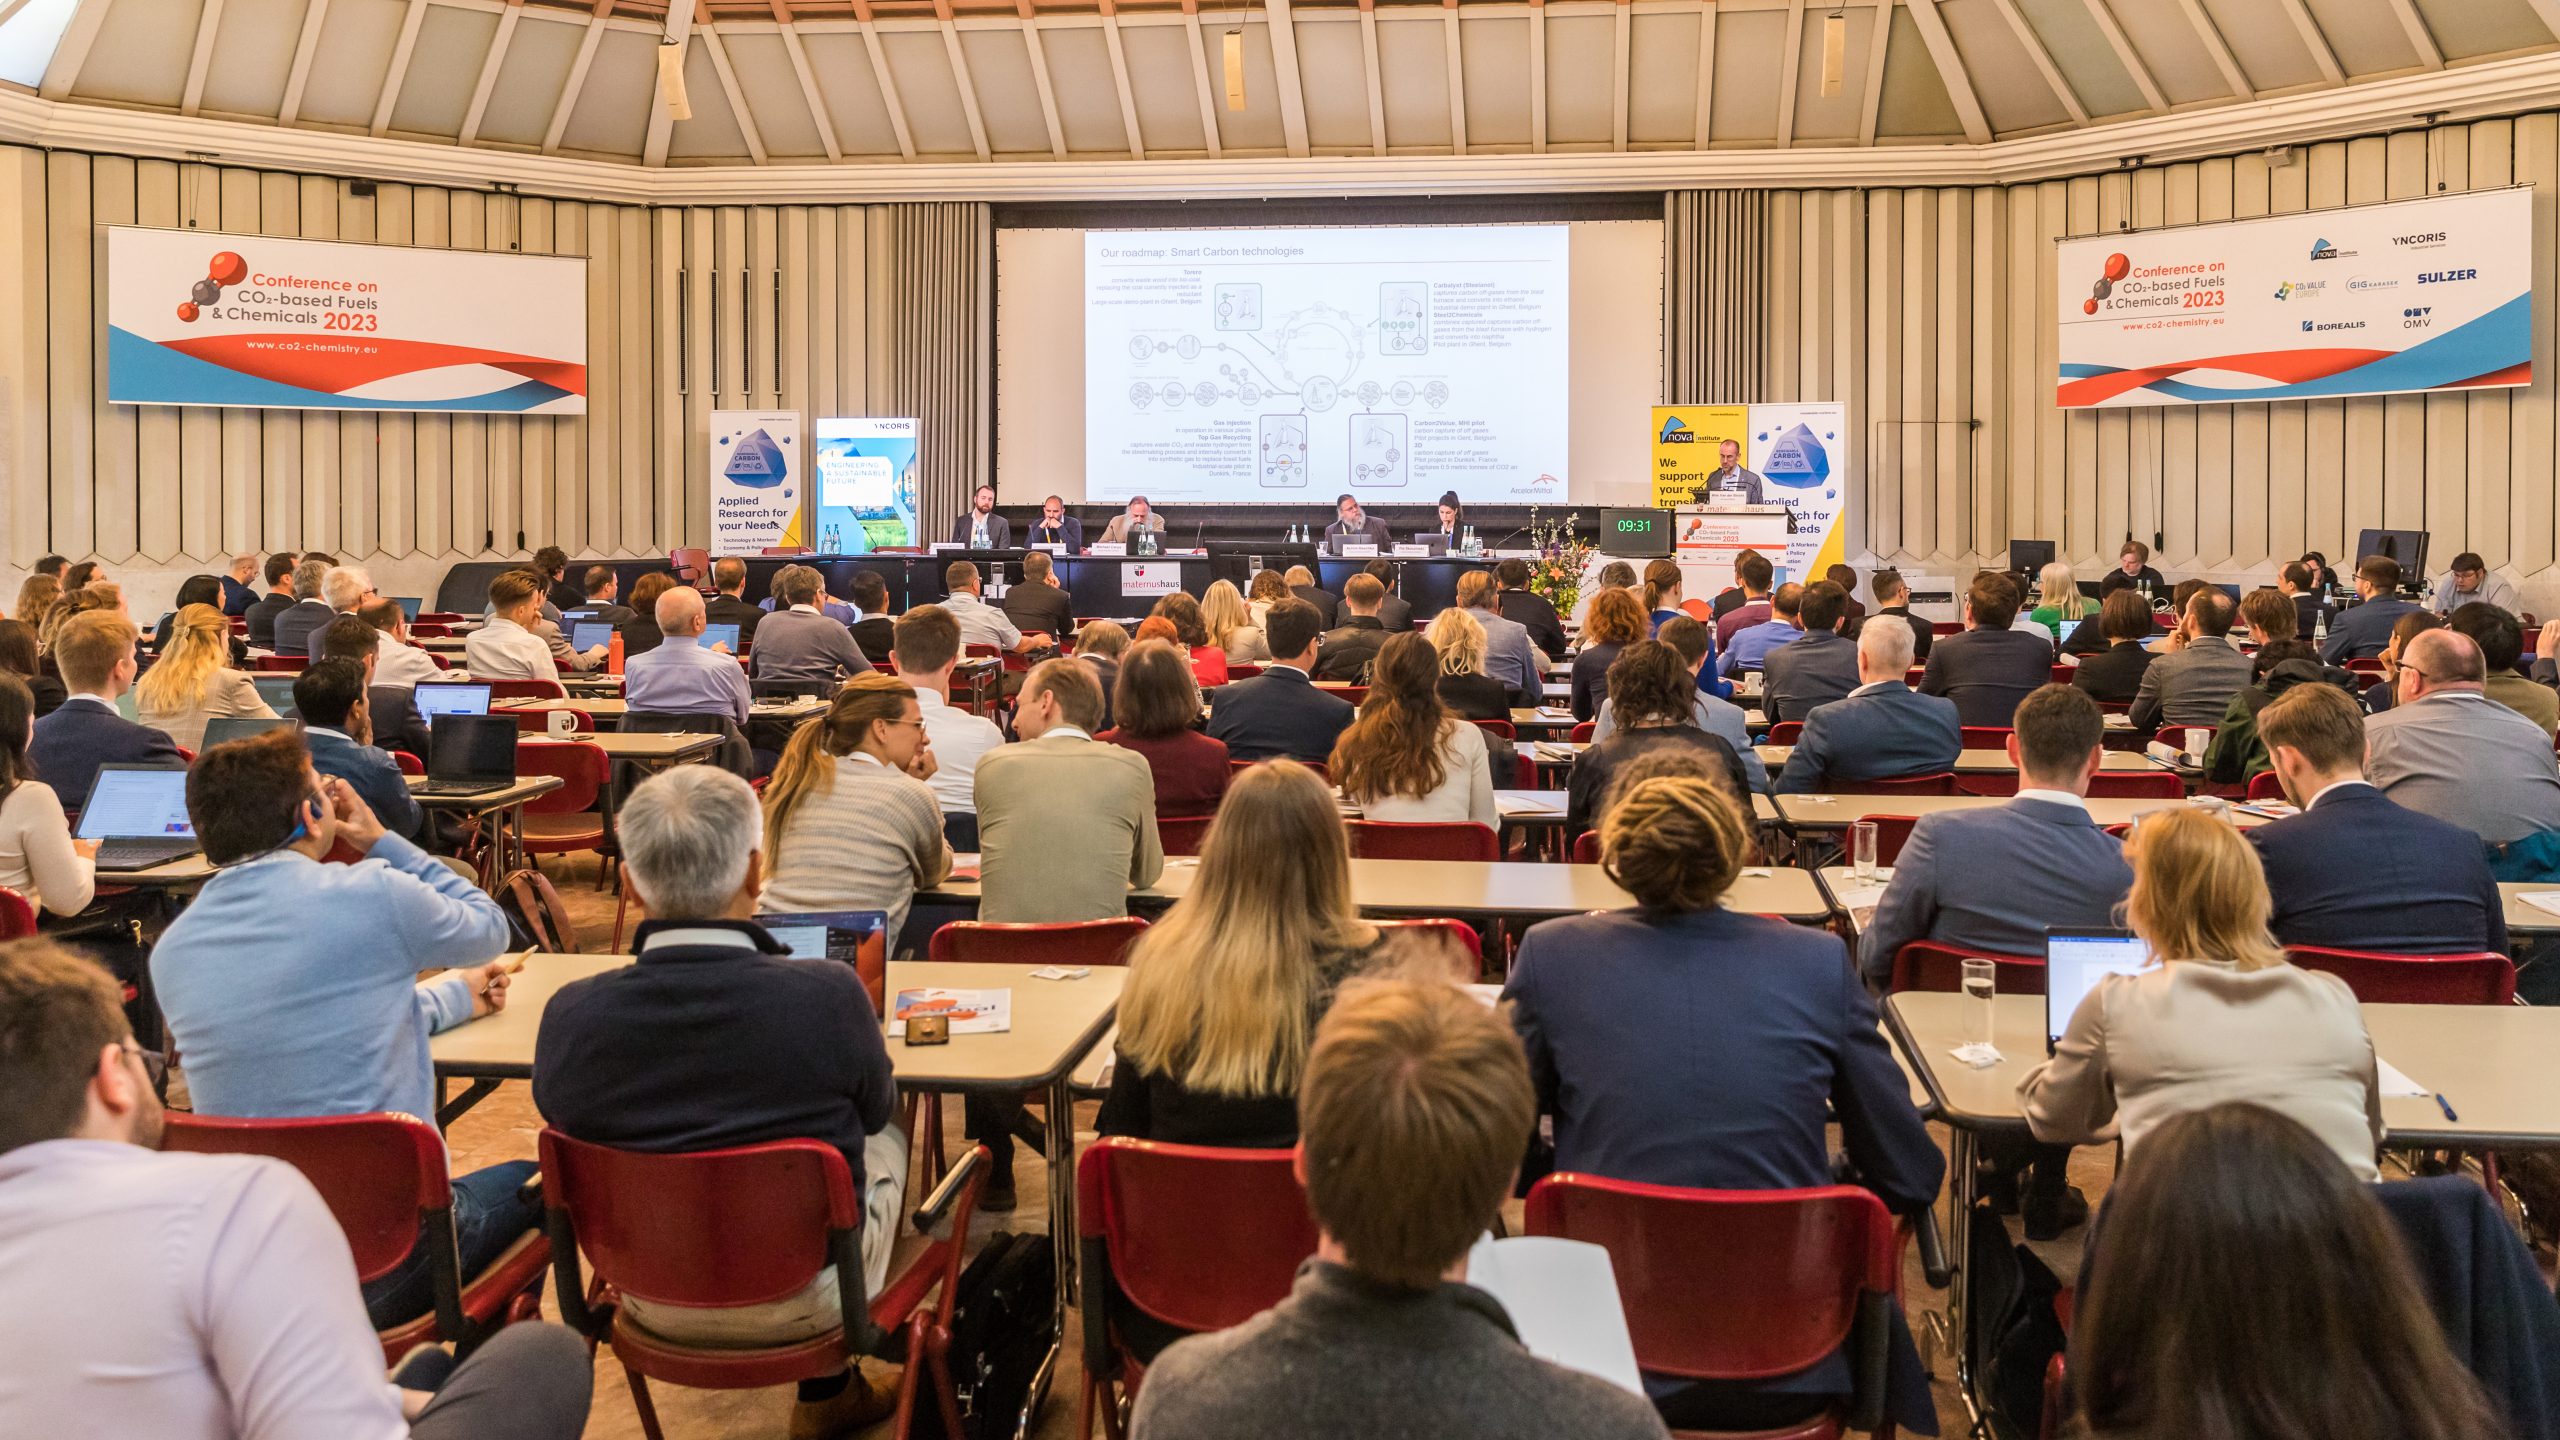 Audience Conference on CO₂-based Fuels and Chemicals 2023